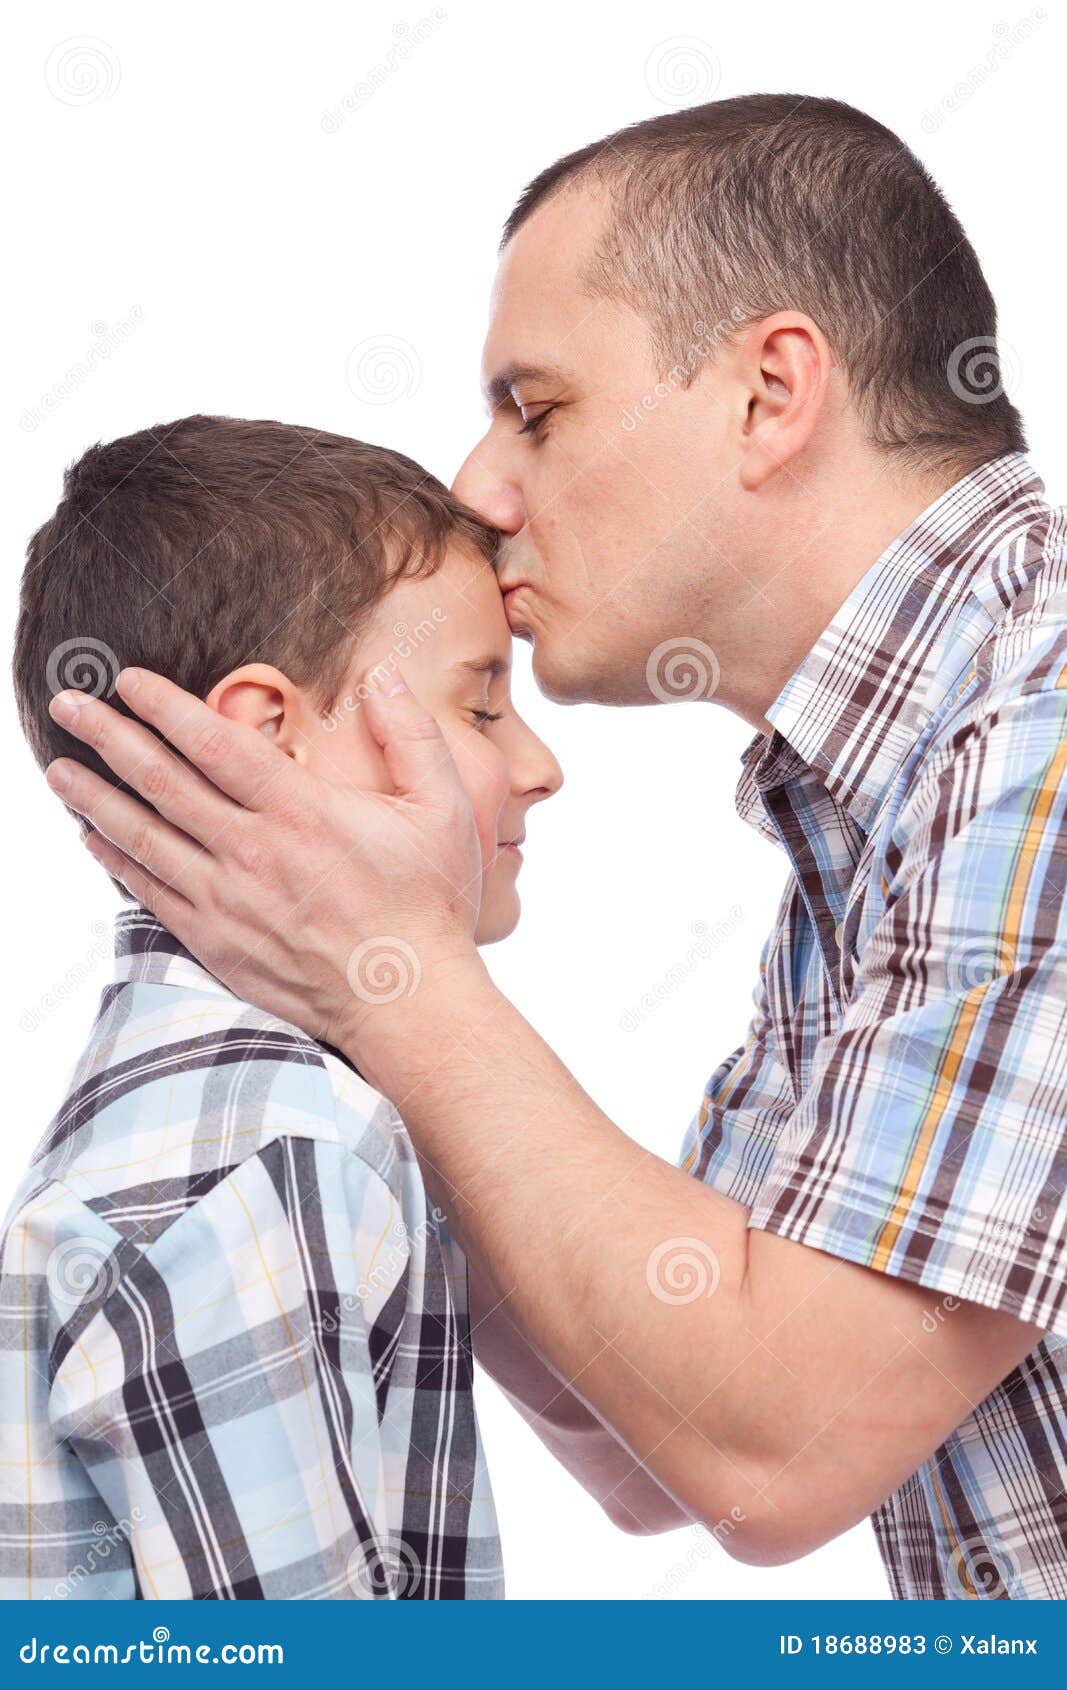 father-kissing-his-son-forehead-18688983.jpg